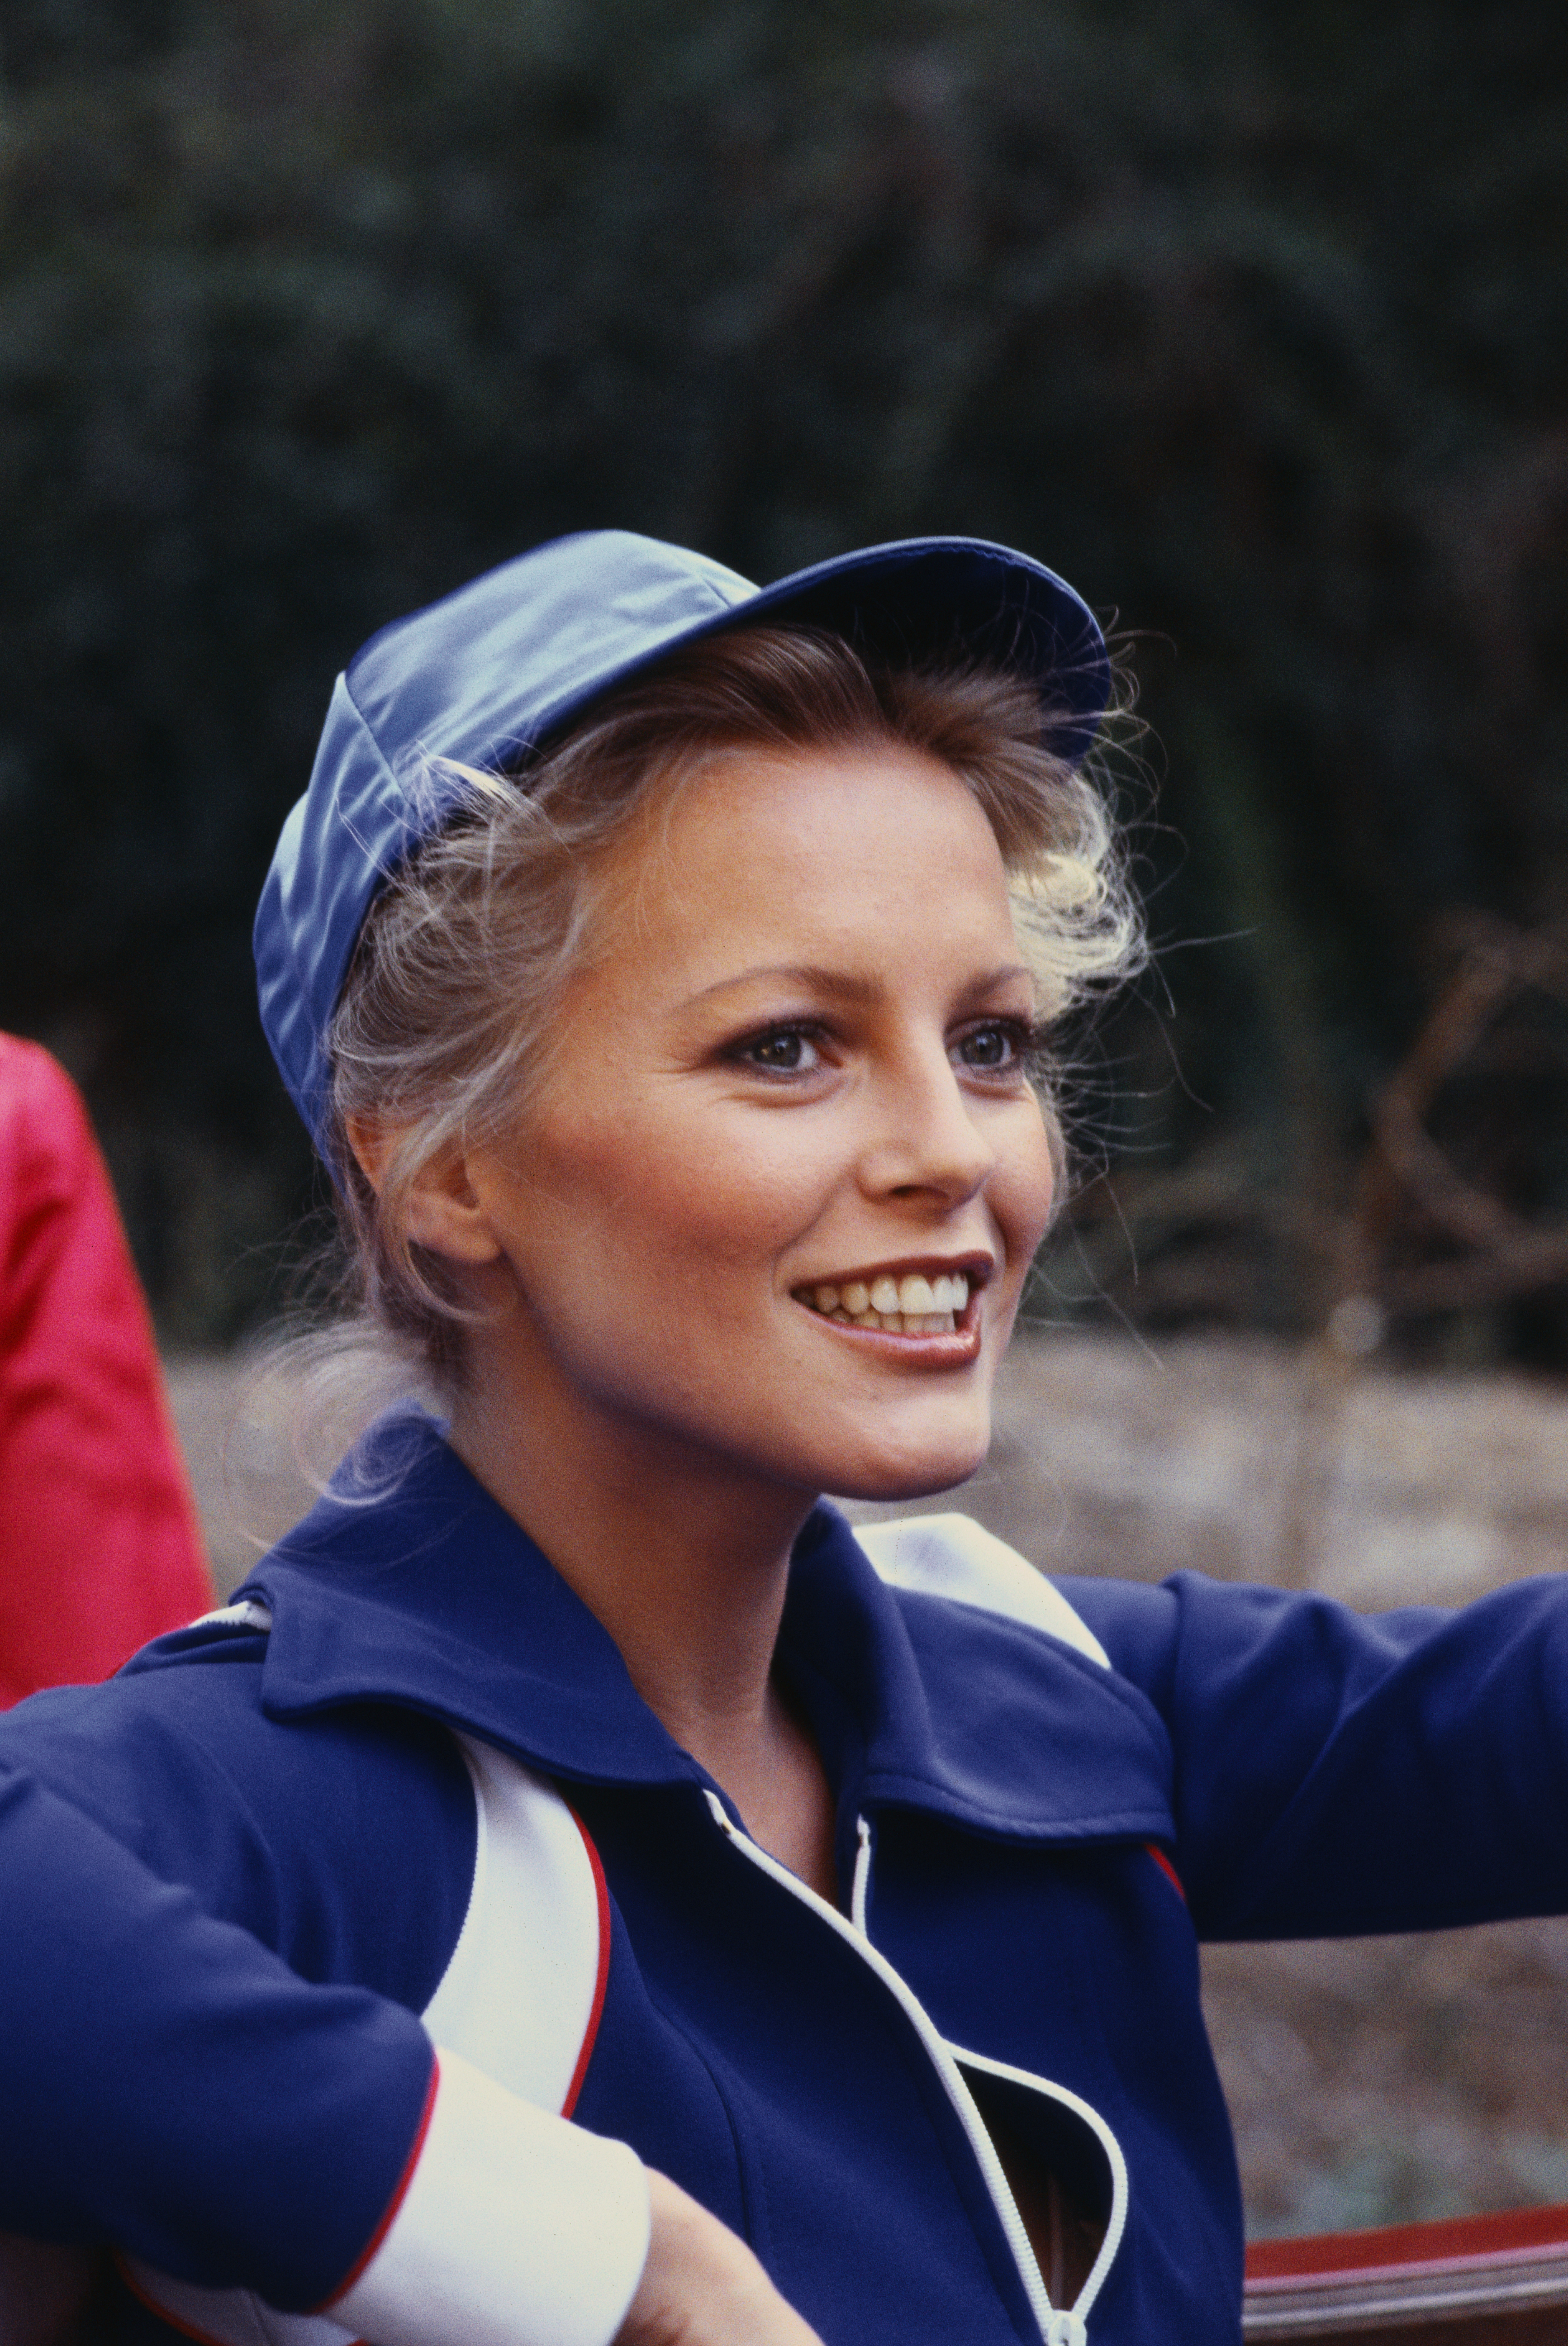 Cheryl Ladd looking younger while sitting and smiling in an undated photo | Source: Getty Images